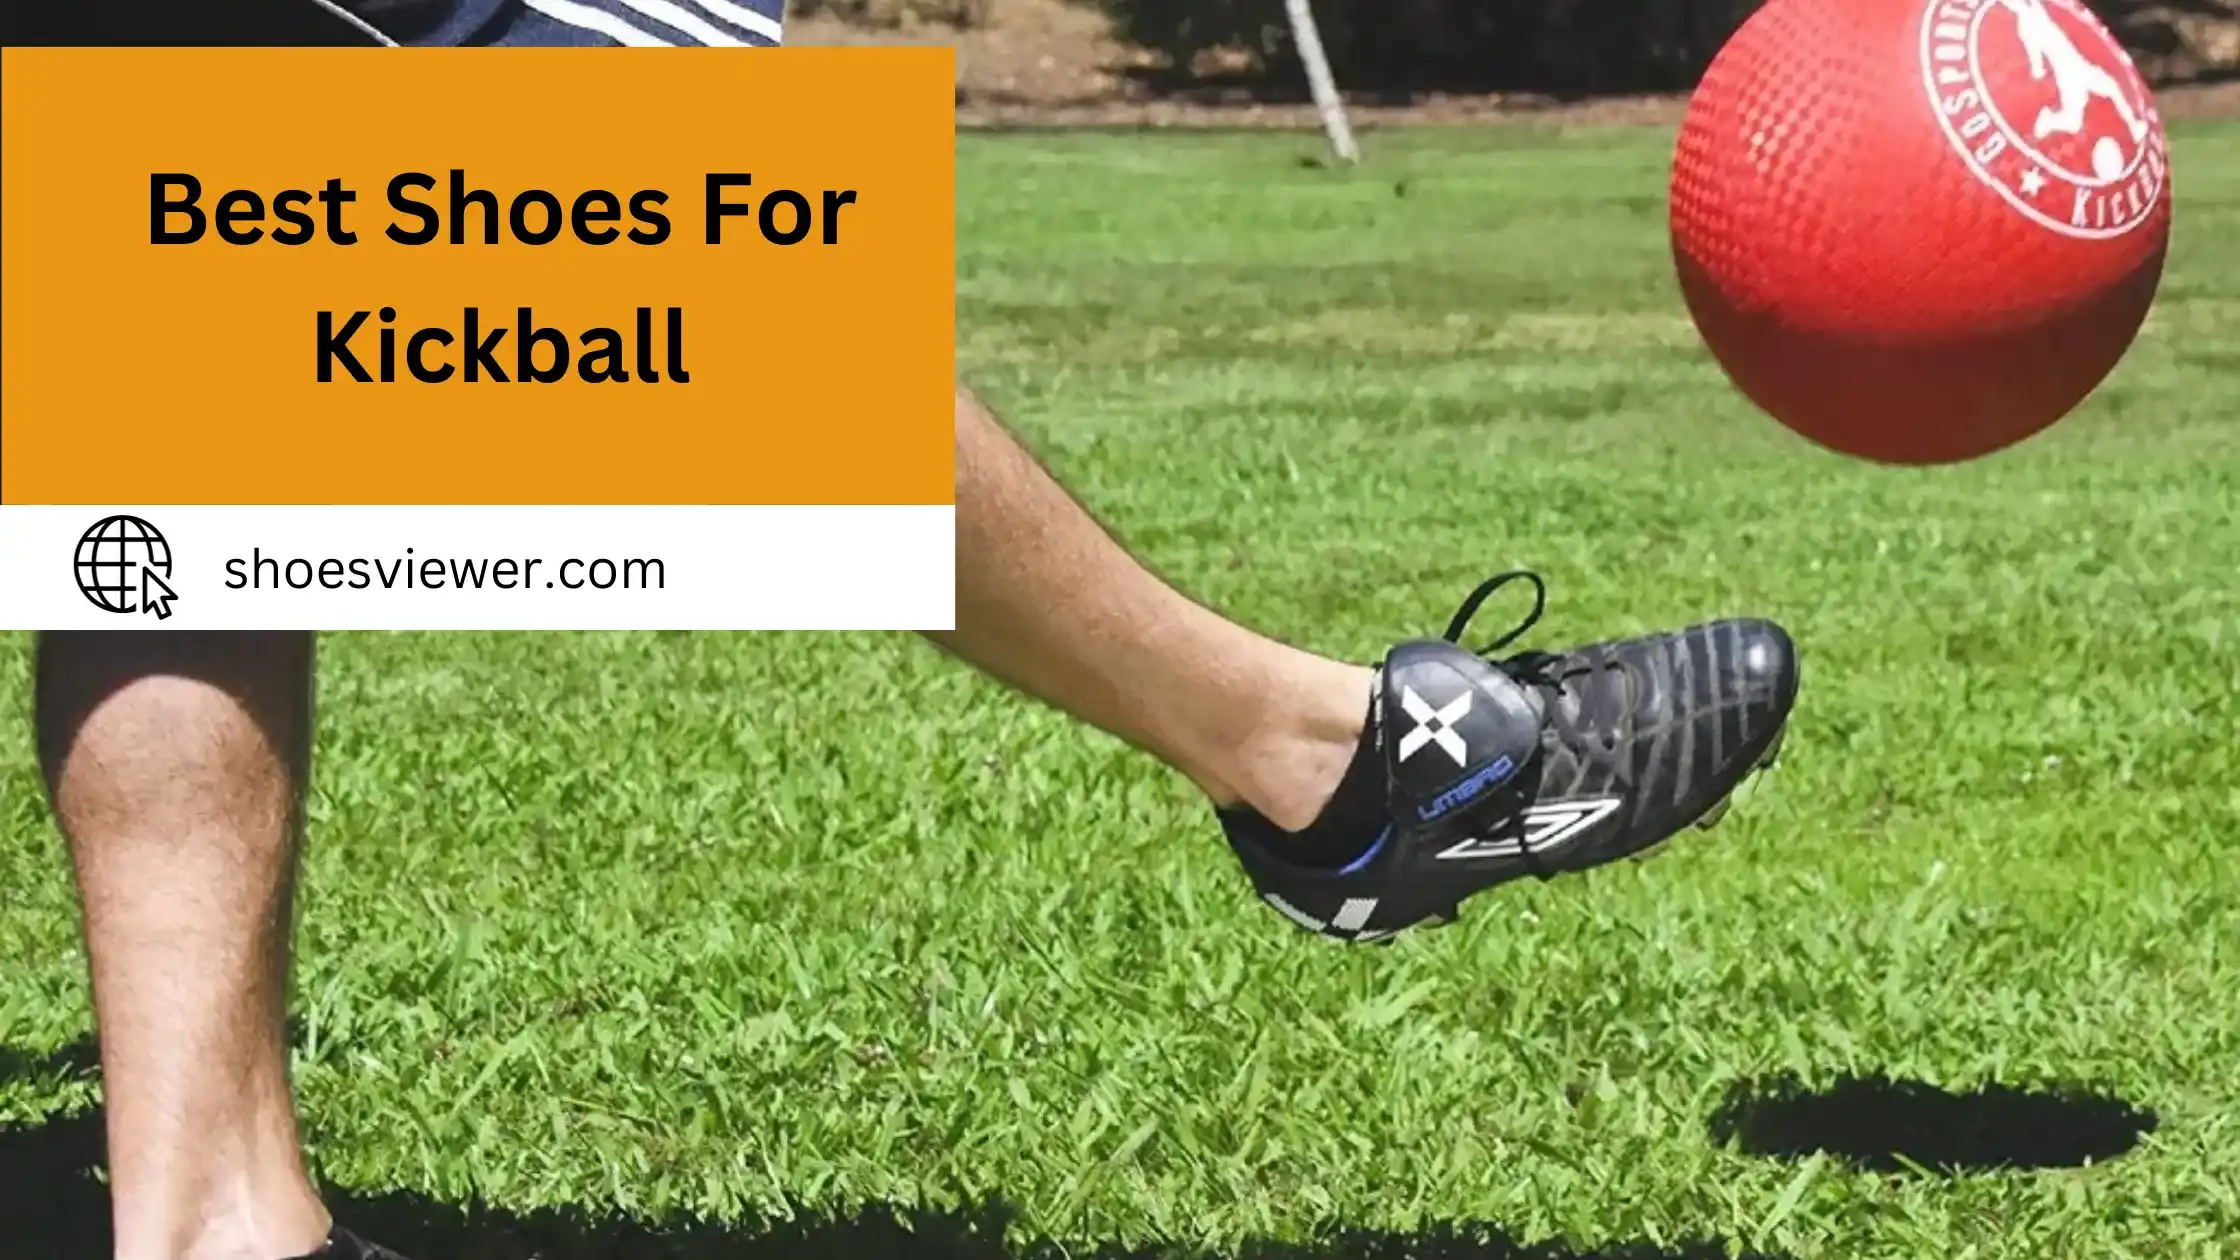 Best Shoes For Kickball - (An In-Depth Guide)